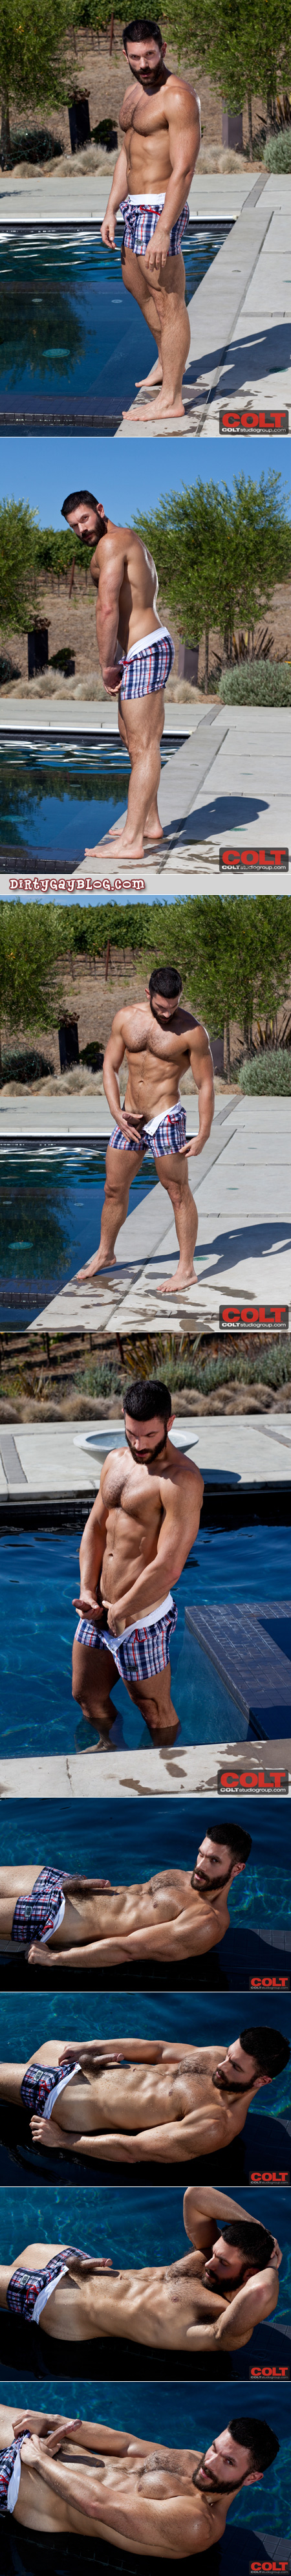 Muscular, hairy-chested man strips off his swim trunks and masturbates in the pool.